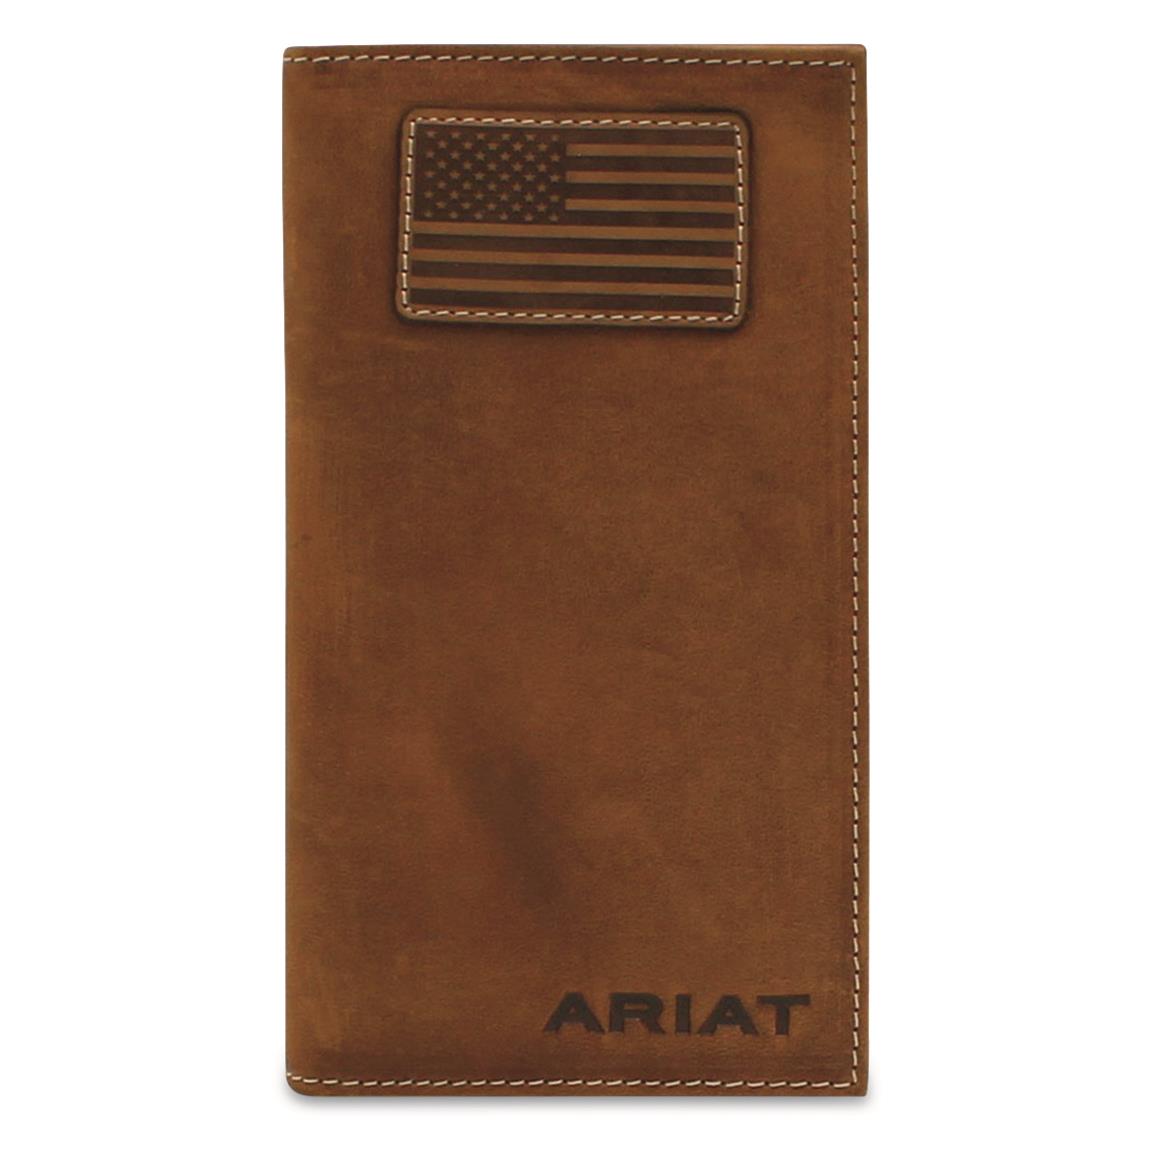 Ariat Flag Patch Rodeo Wallet, Medium Brown